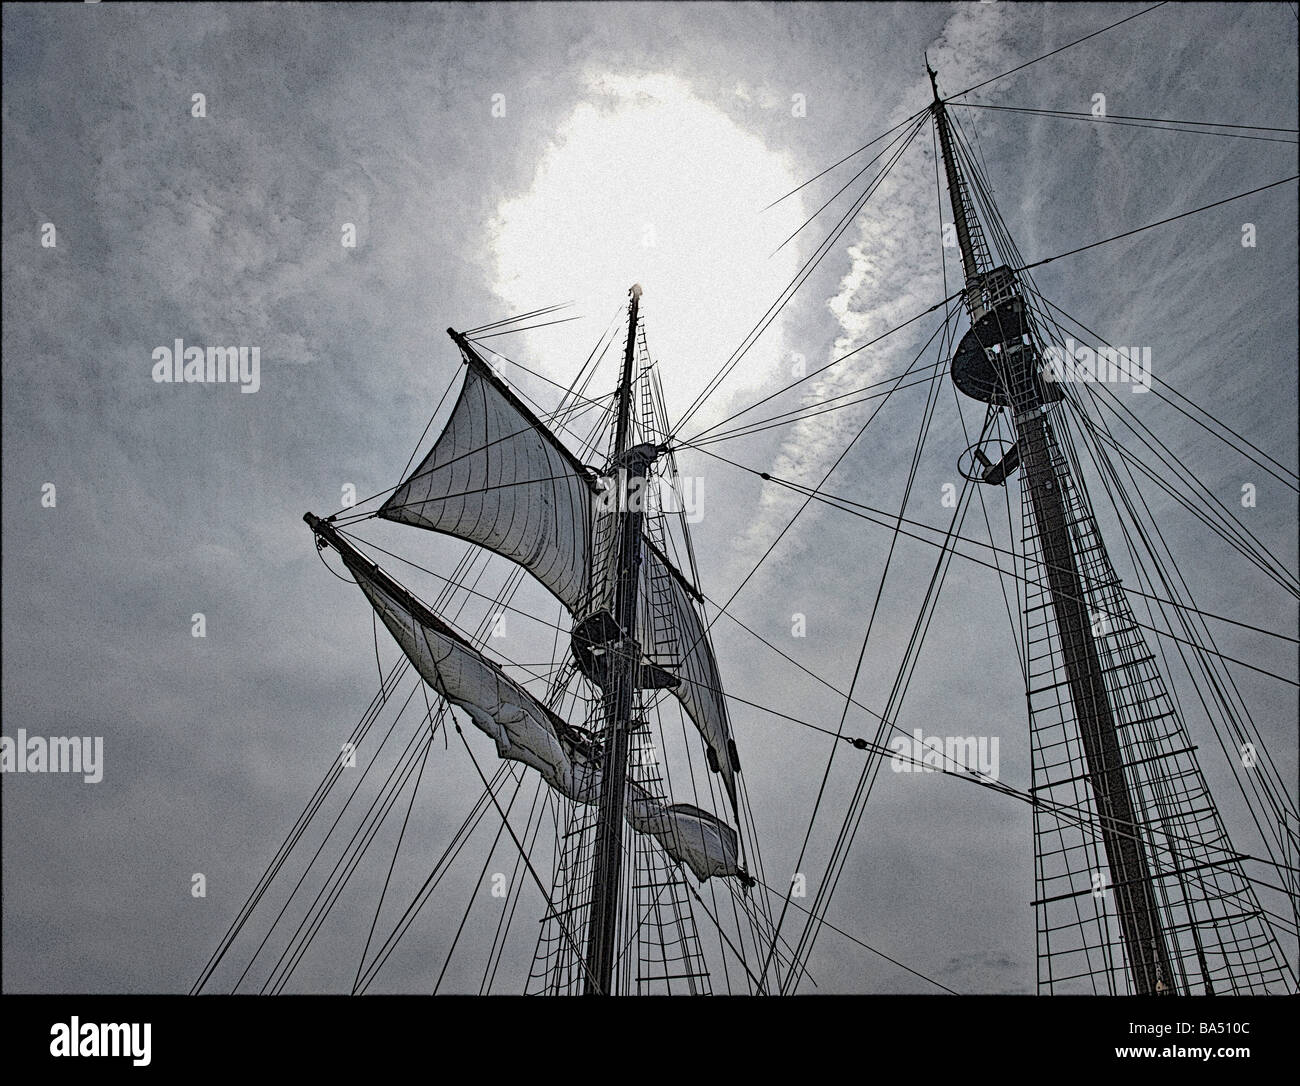 tall-ship tall-ships two masts and unfurled sail against bright sun and gray clouds, done in drawing detail style, ropes, lines Stock Photo